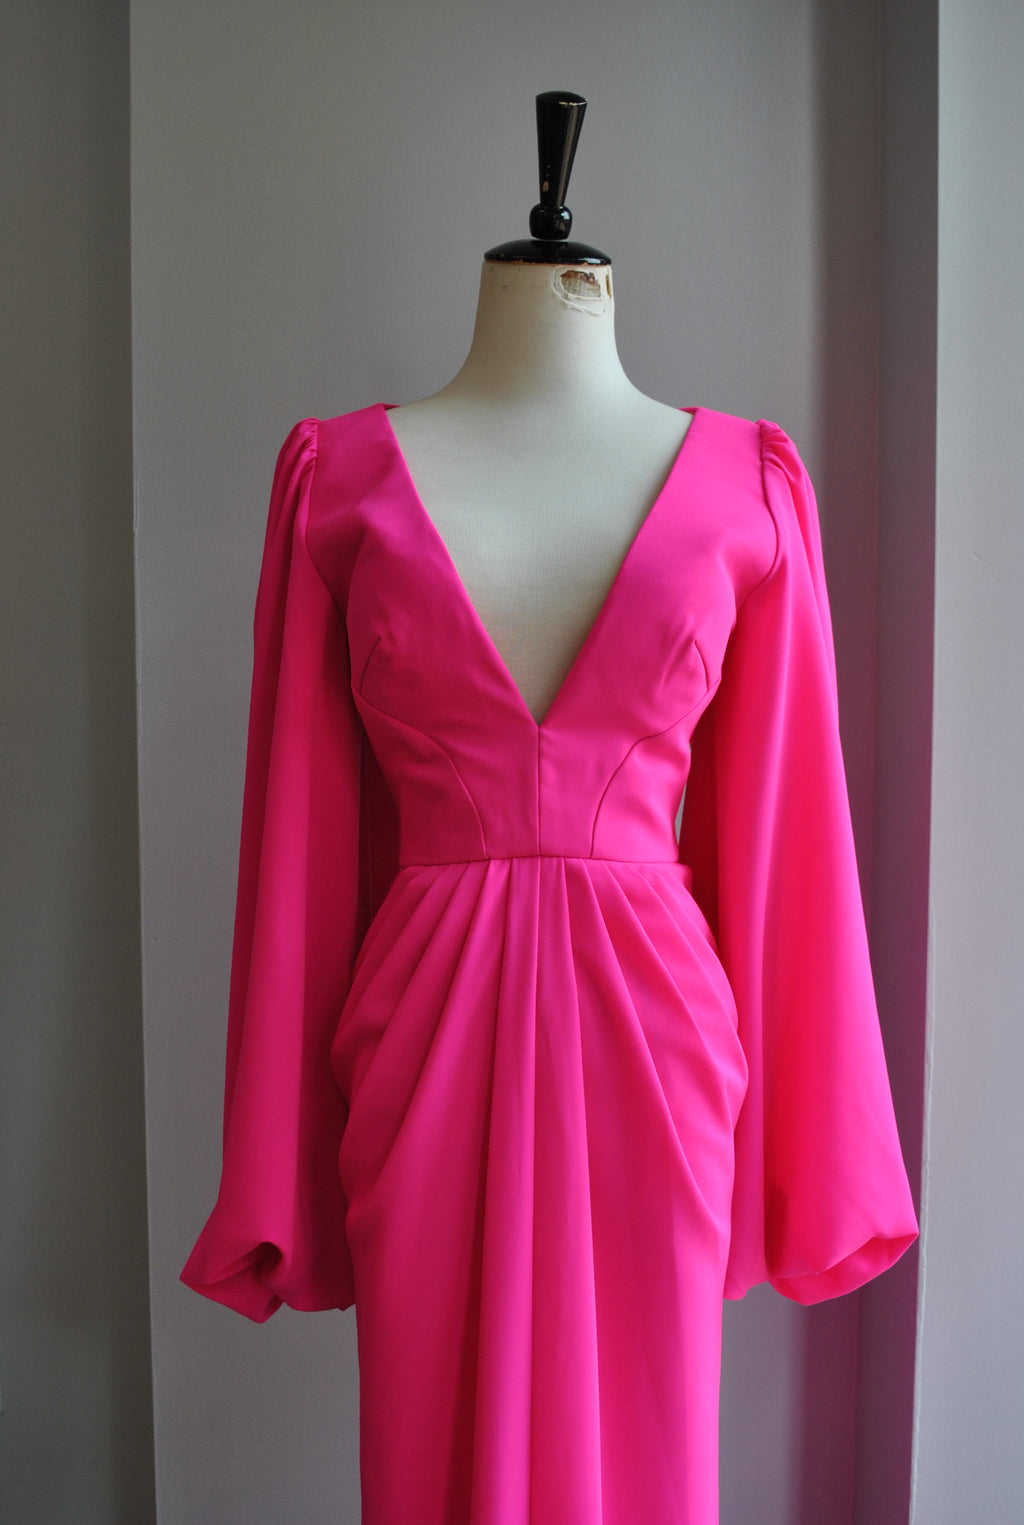 HOT PINK EVENING GOWN WITH LONG SLEEVES